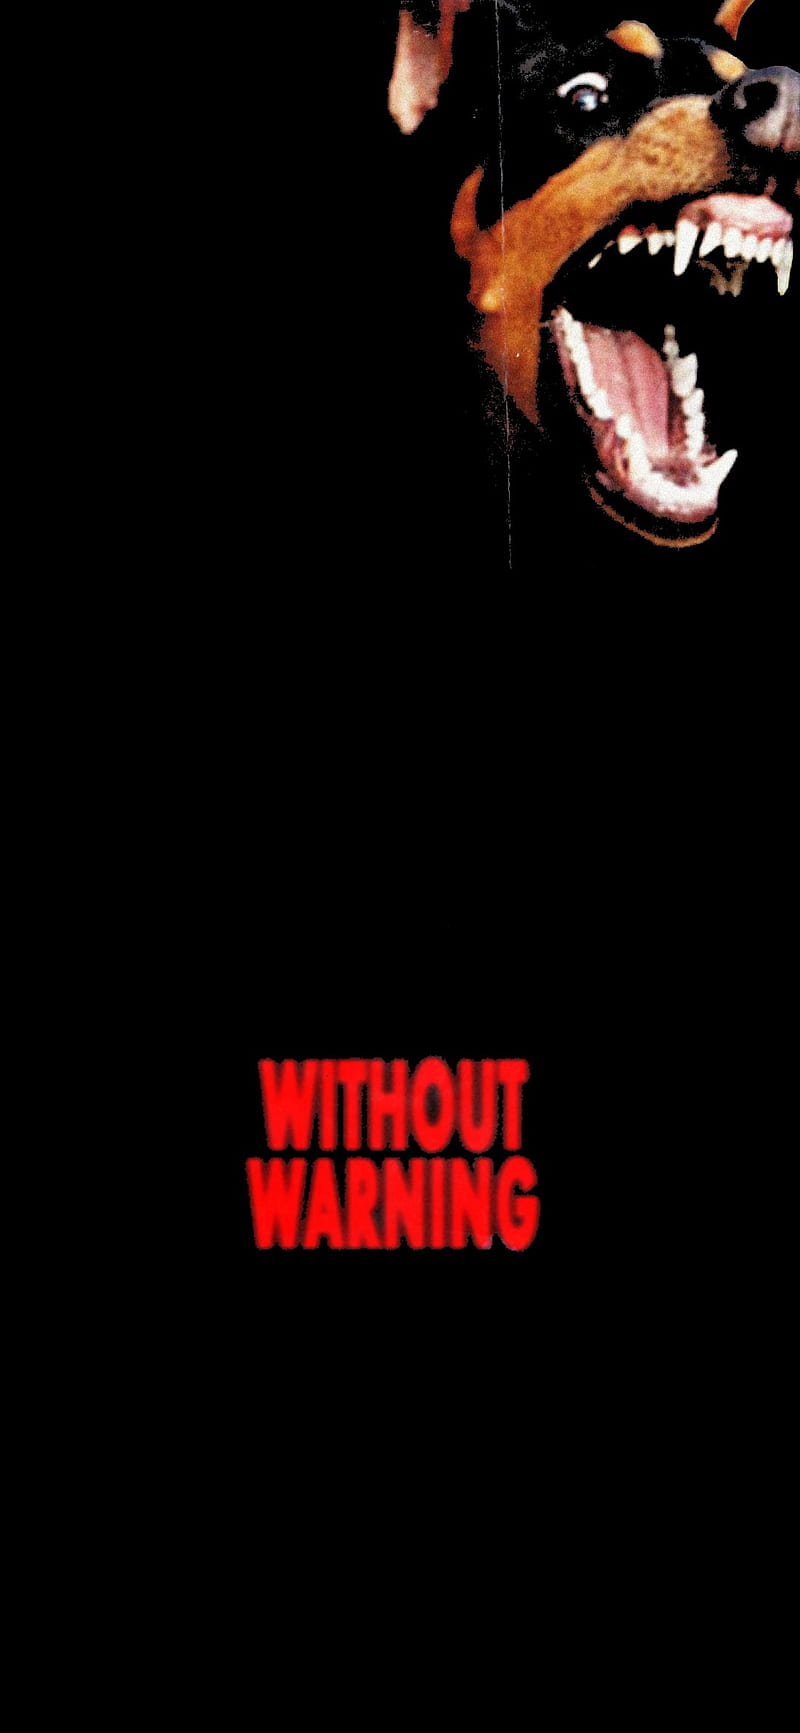 Without Warning wallpaper by Adam574  Download on ZEDGE  f1c0